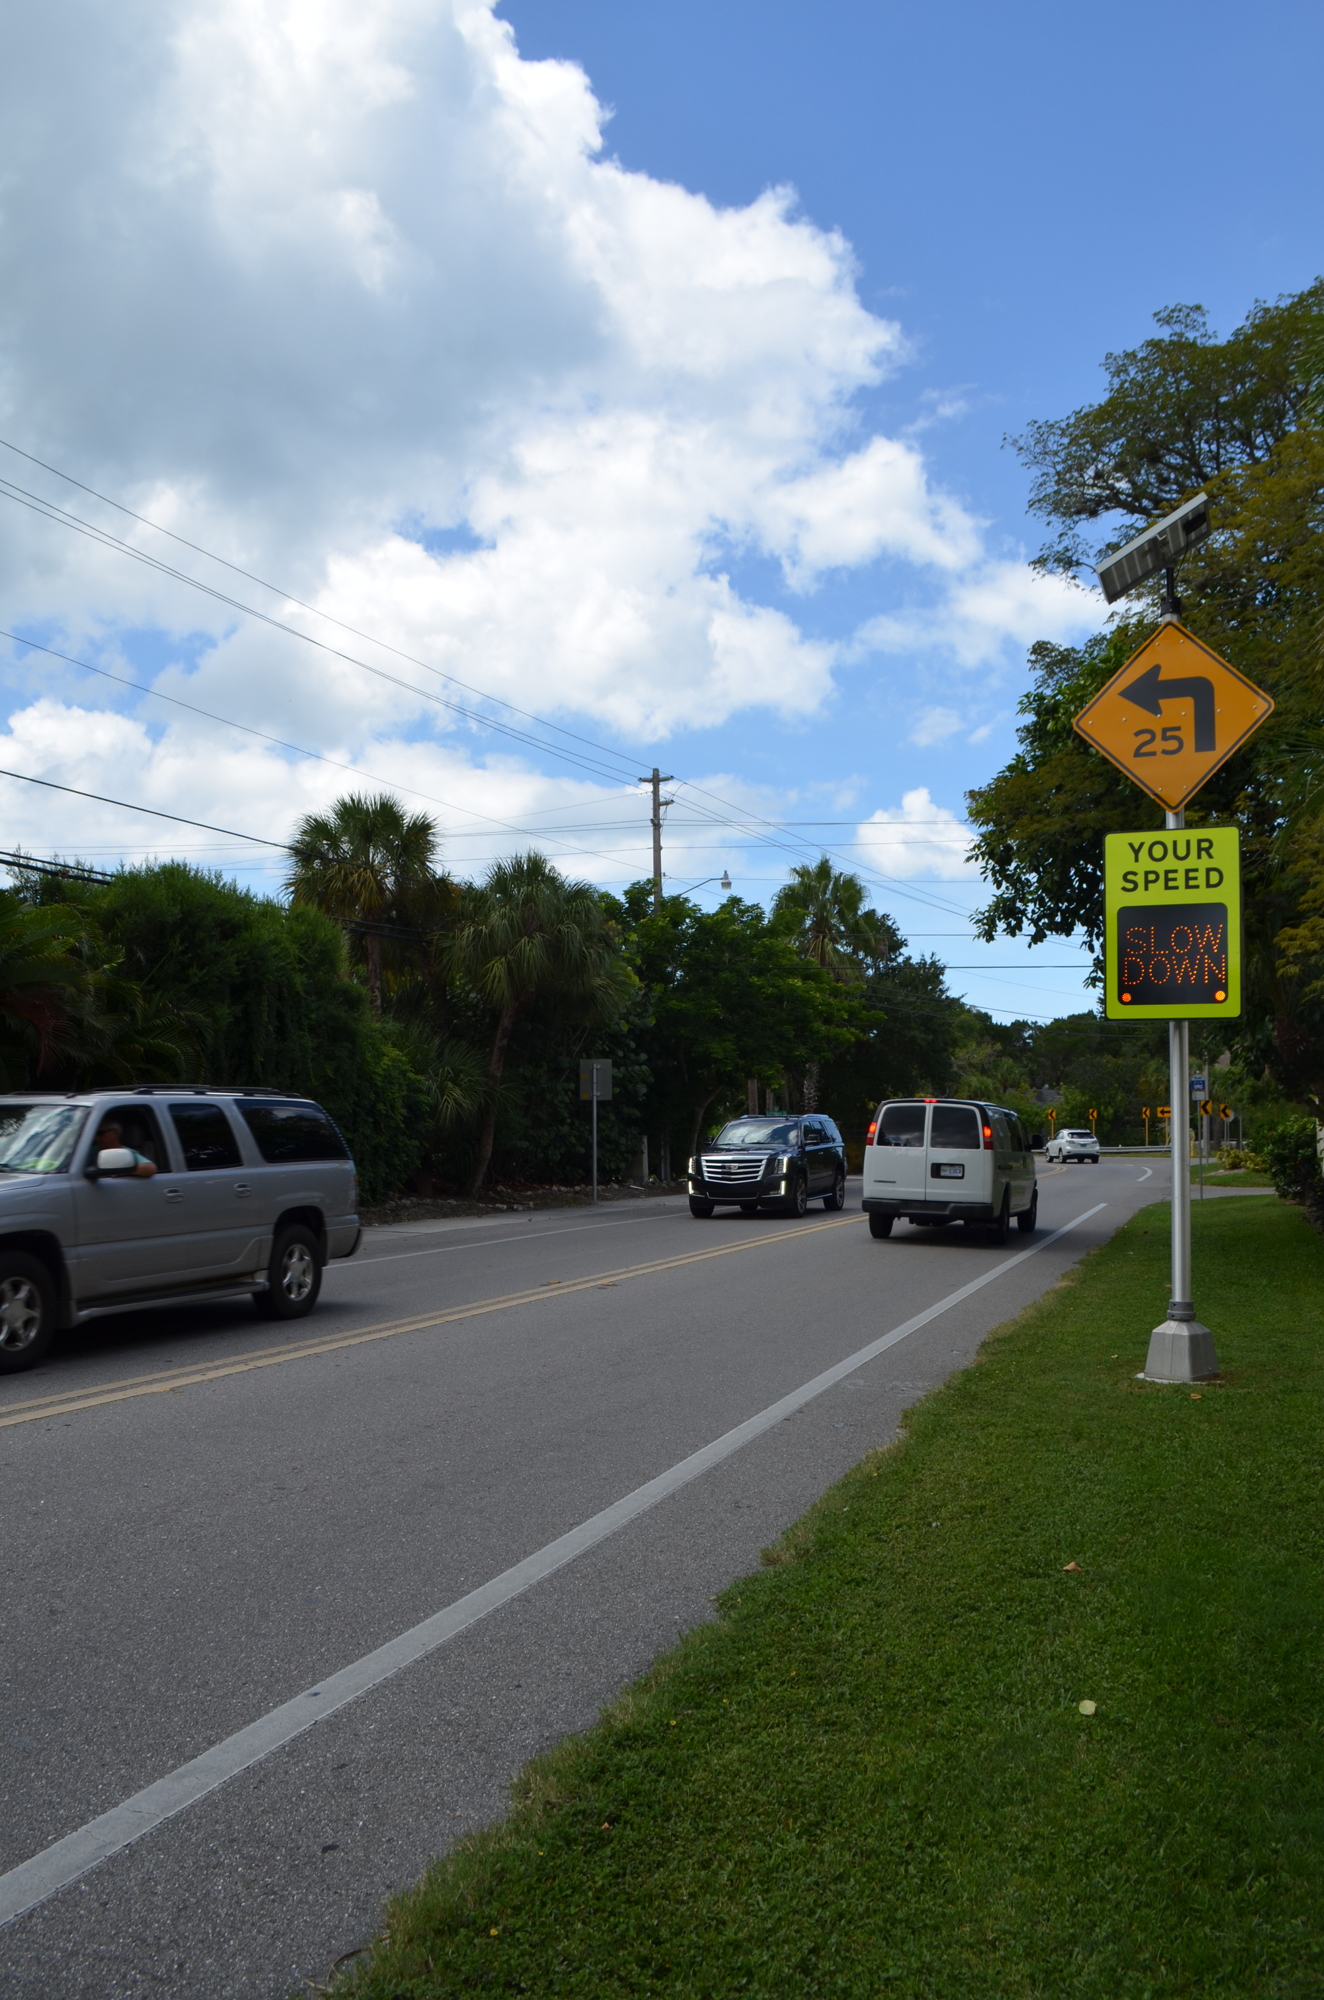 FDOT has already lowered the speed limit and installed new signage on a portion of Siesta Drive.